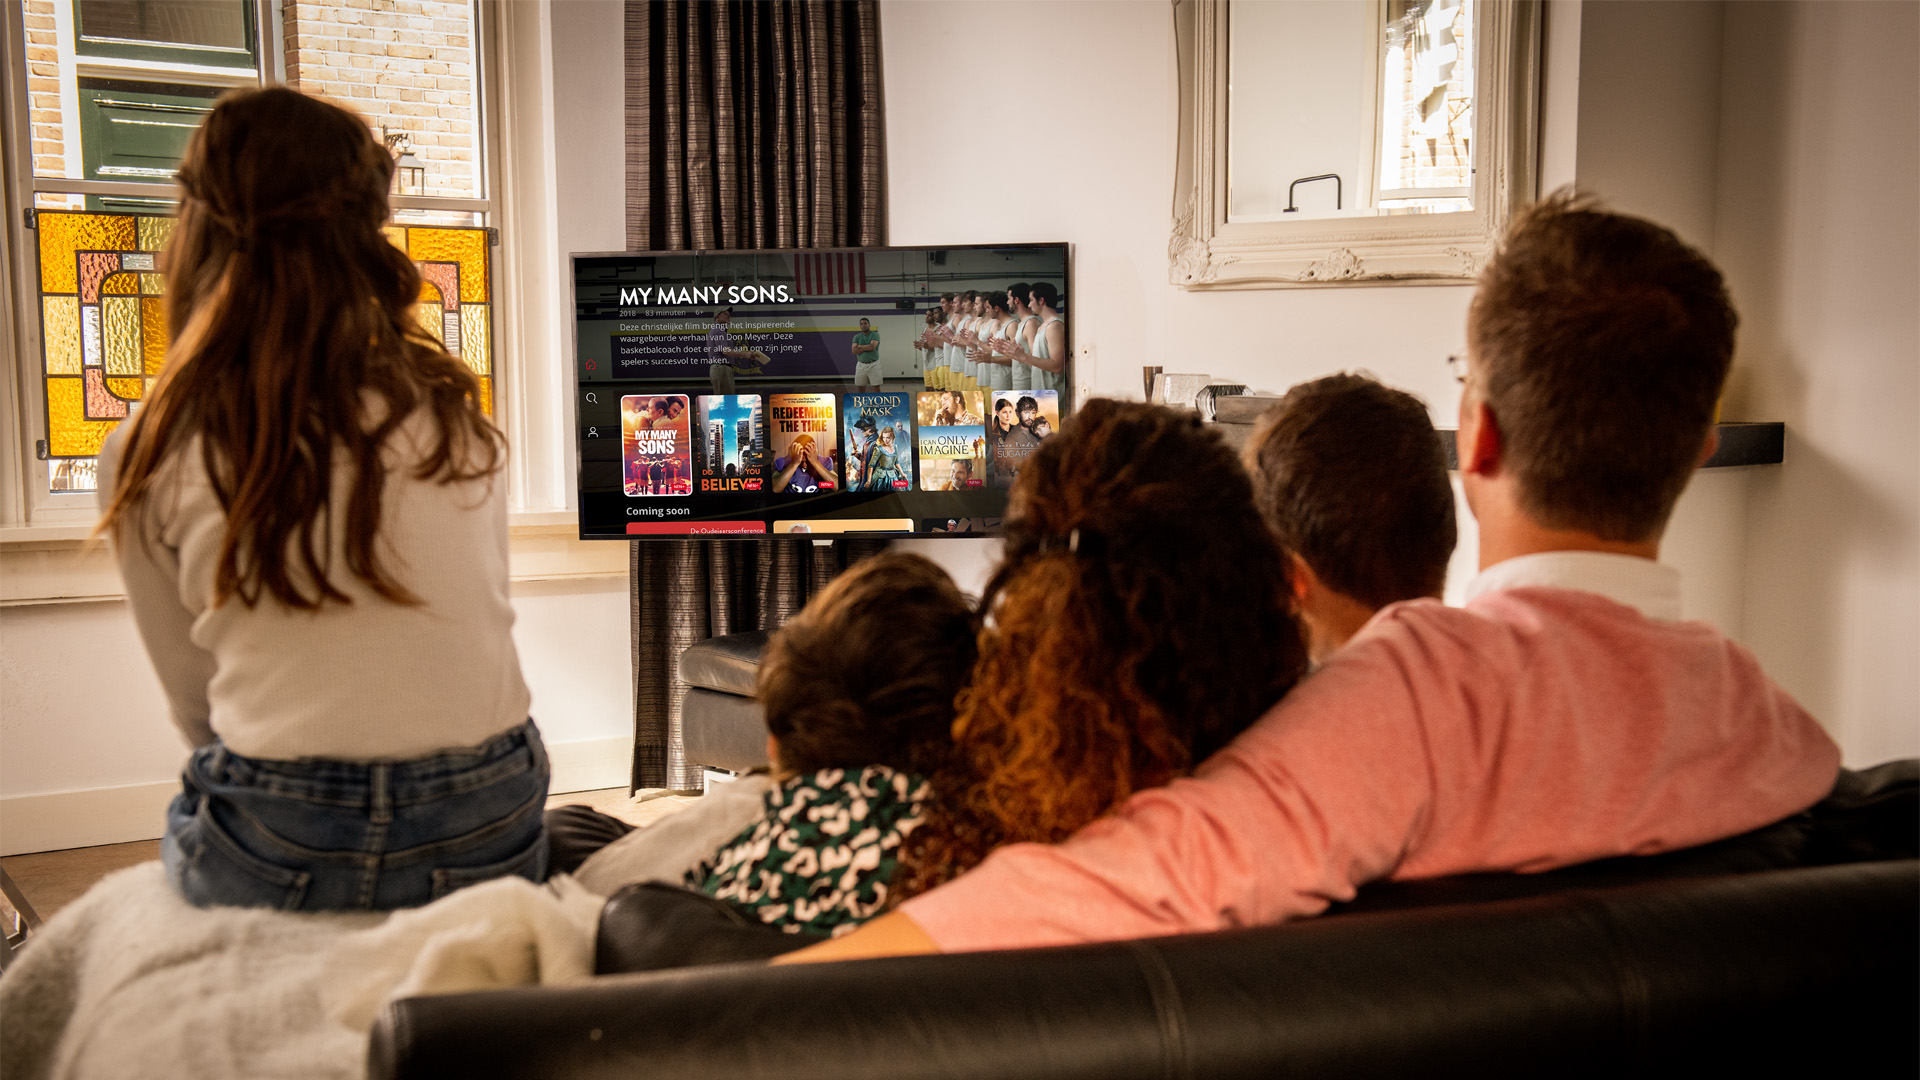 Use our Smart TV app in order to watch our wide selection of family-friendly content on your TV